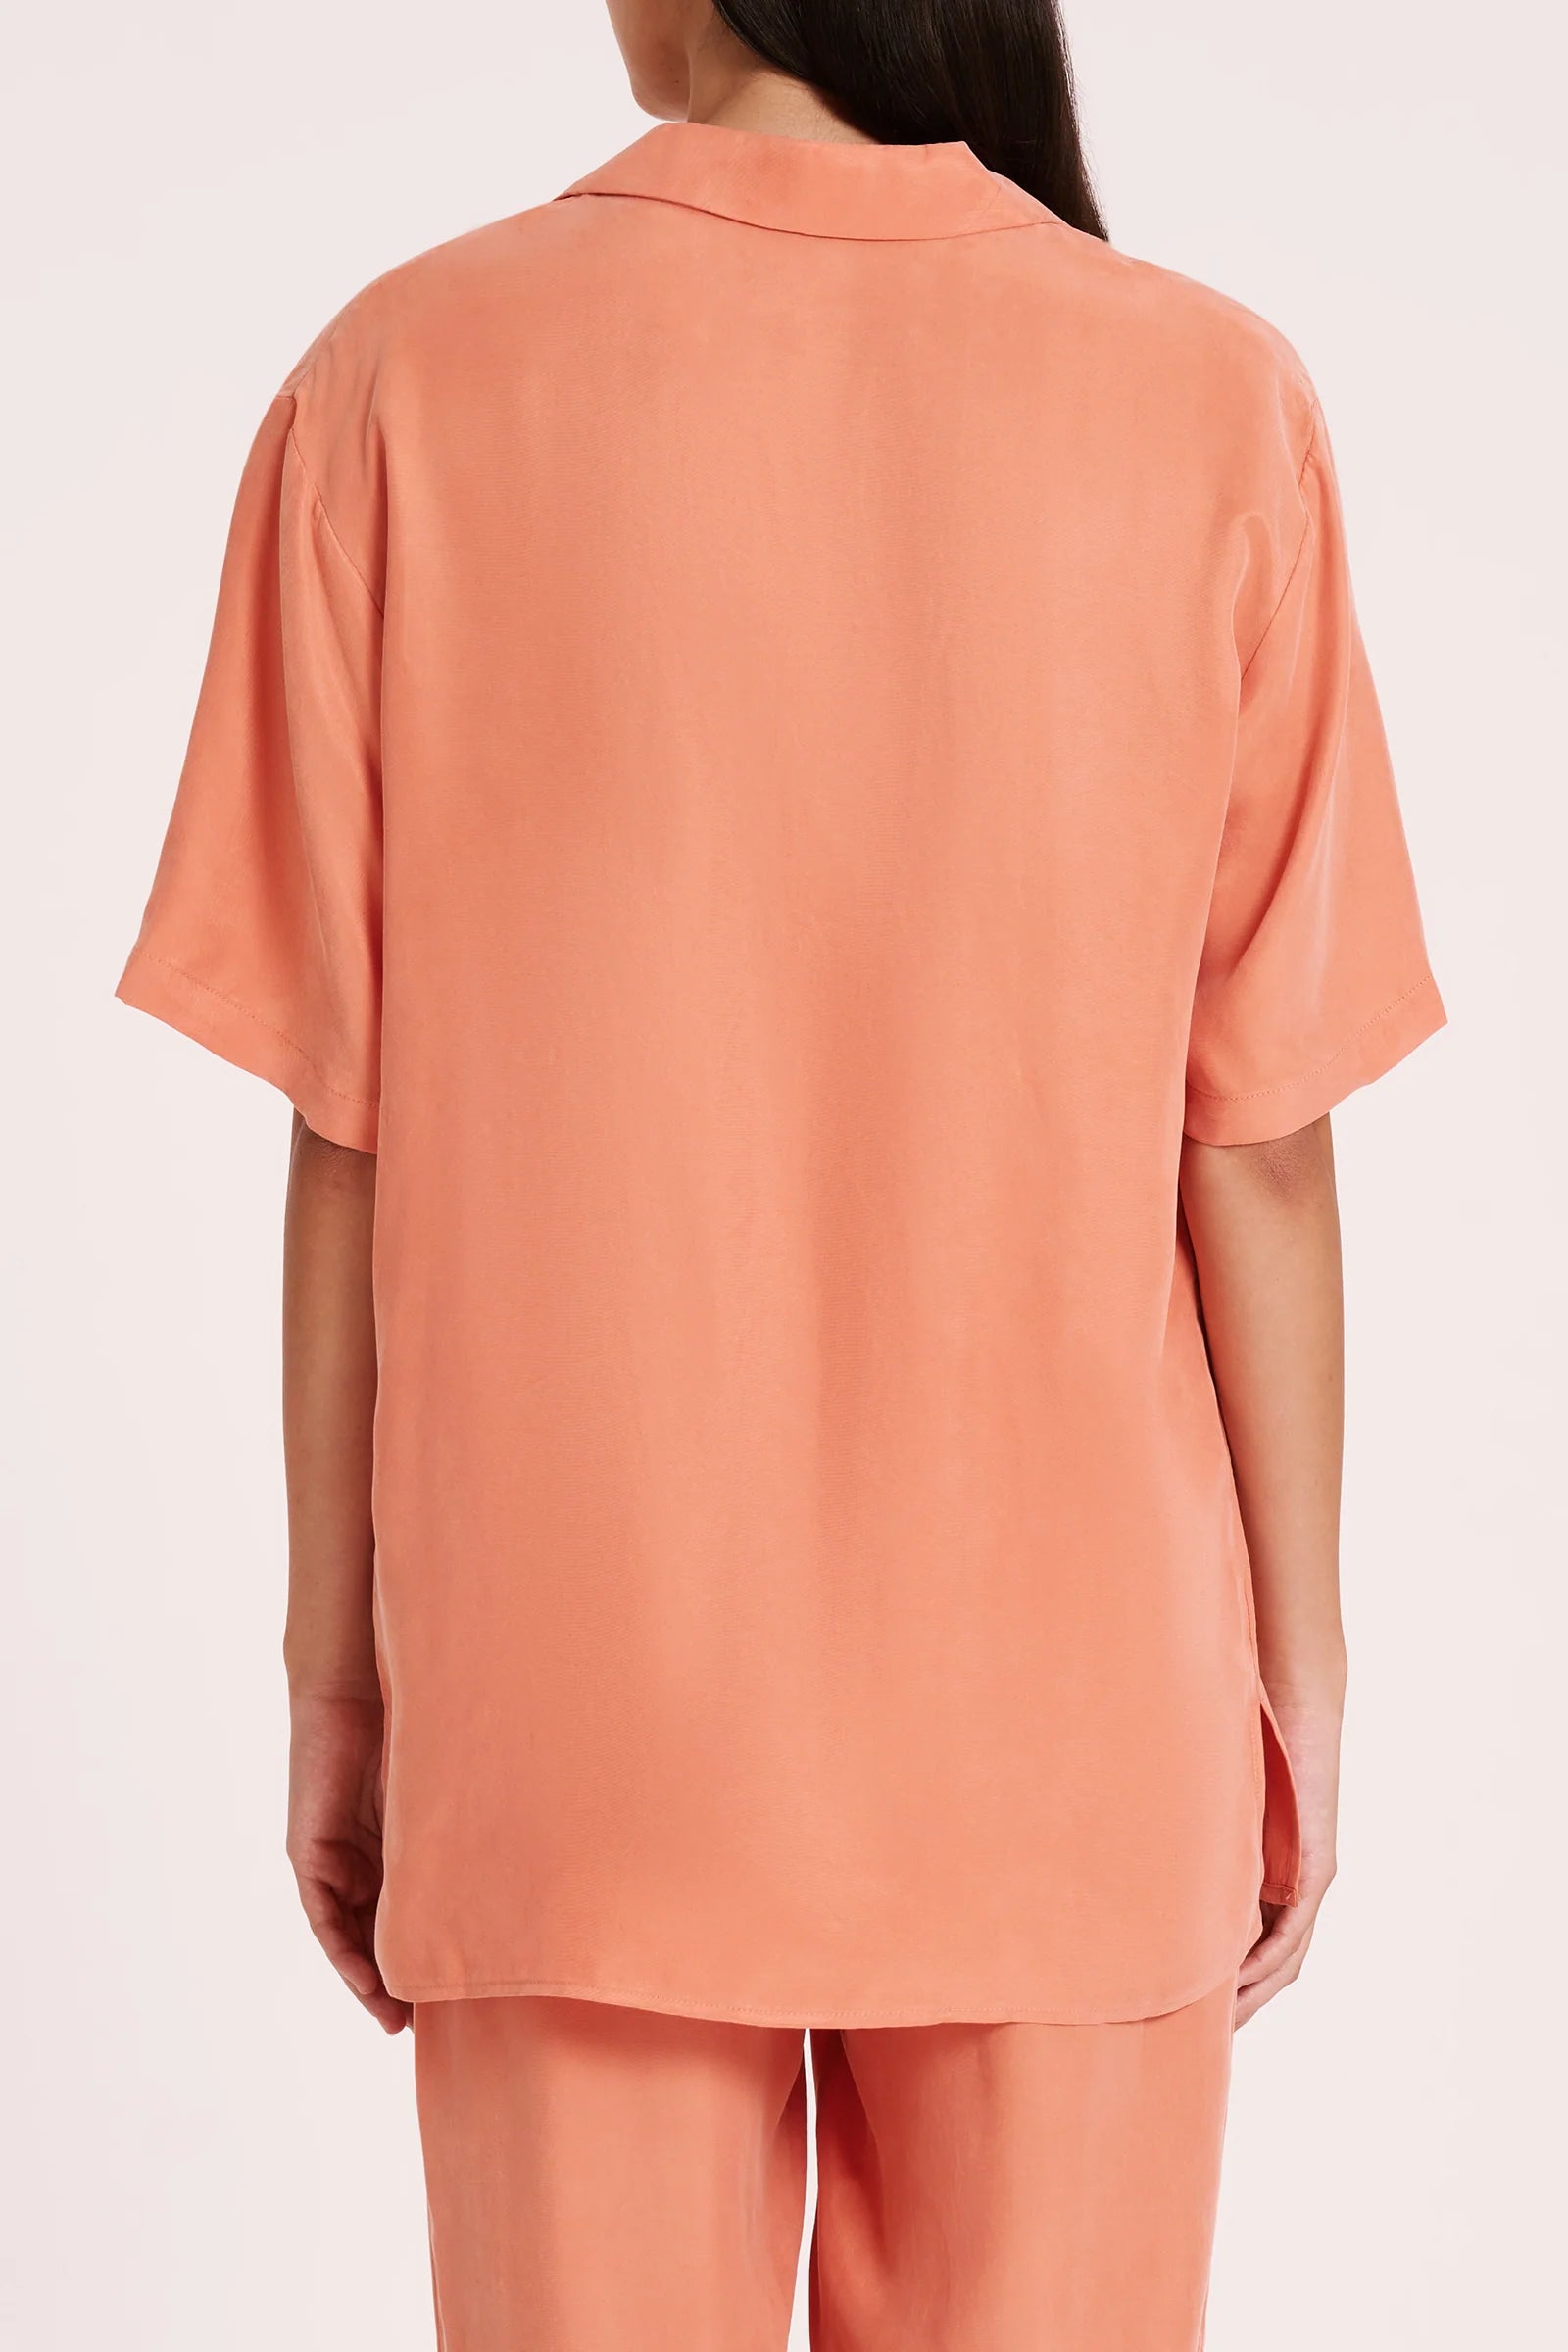 Nude Lucy | Lucia Cupro Shirt - Watermelon